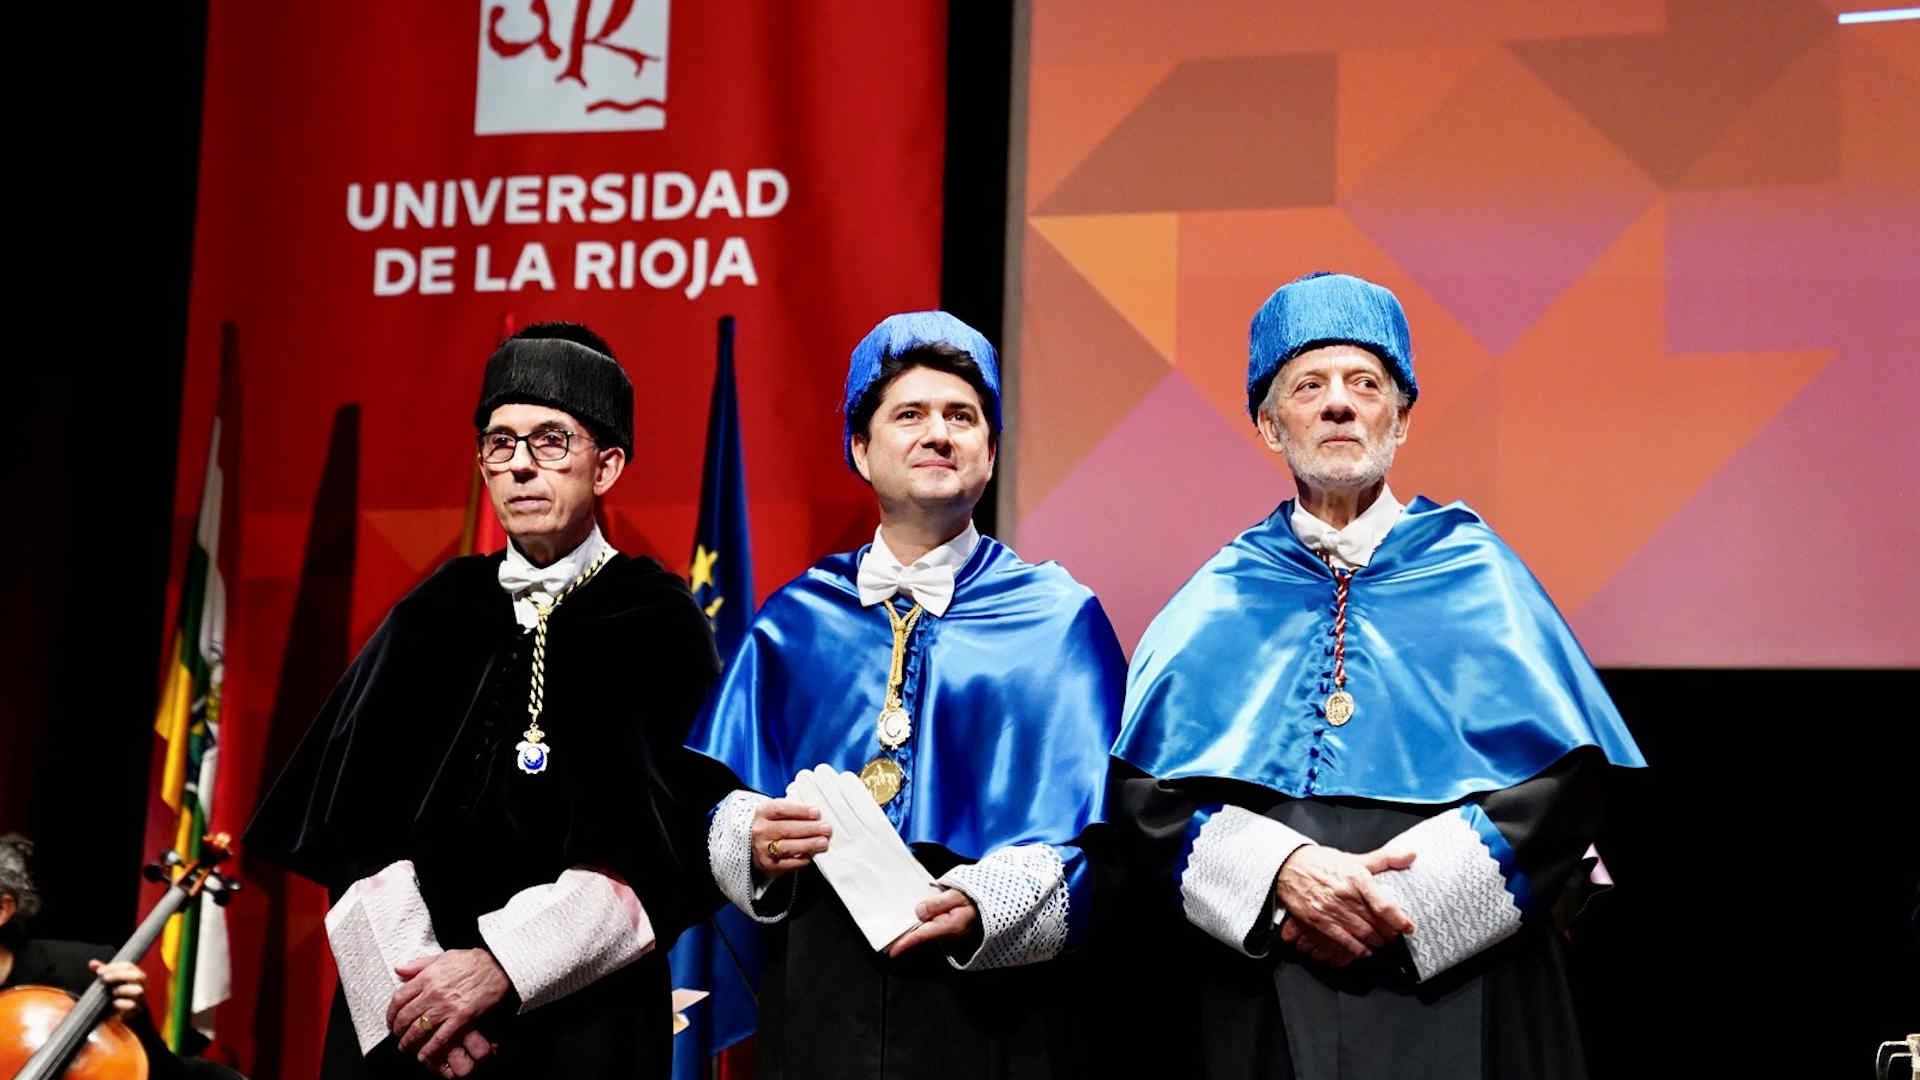 Javier García Martínez has just received an honorary doctorate from the University of La Rioja.